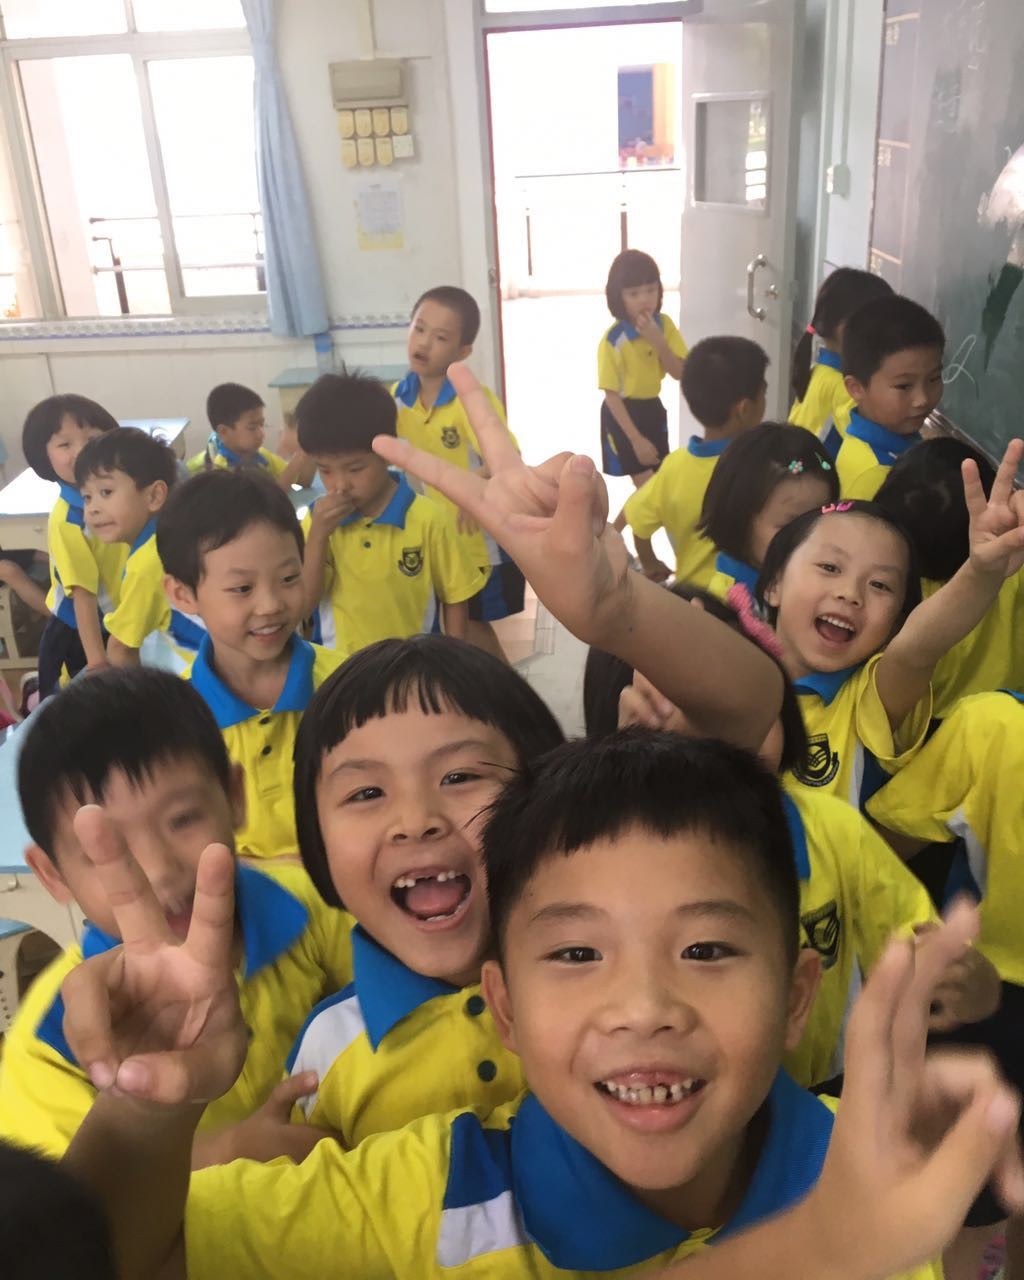 Students learning English at school in Foshan, China